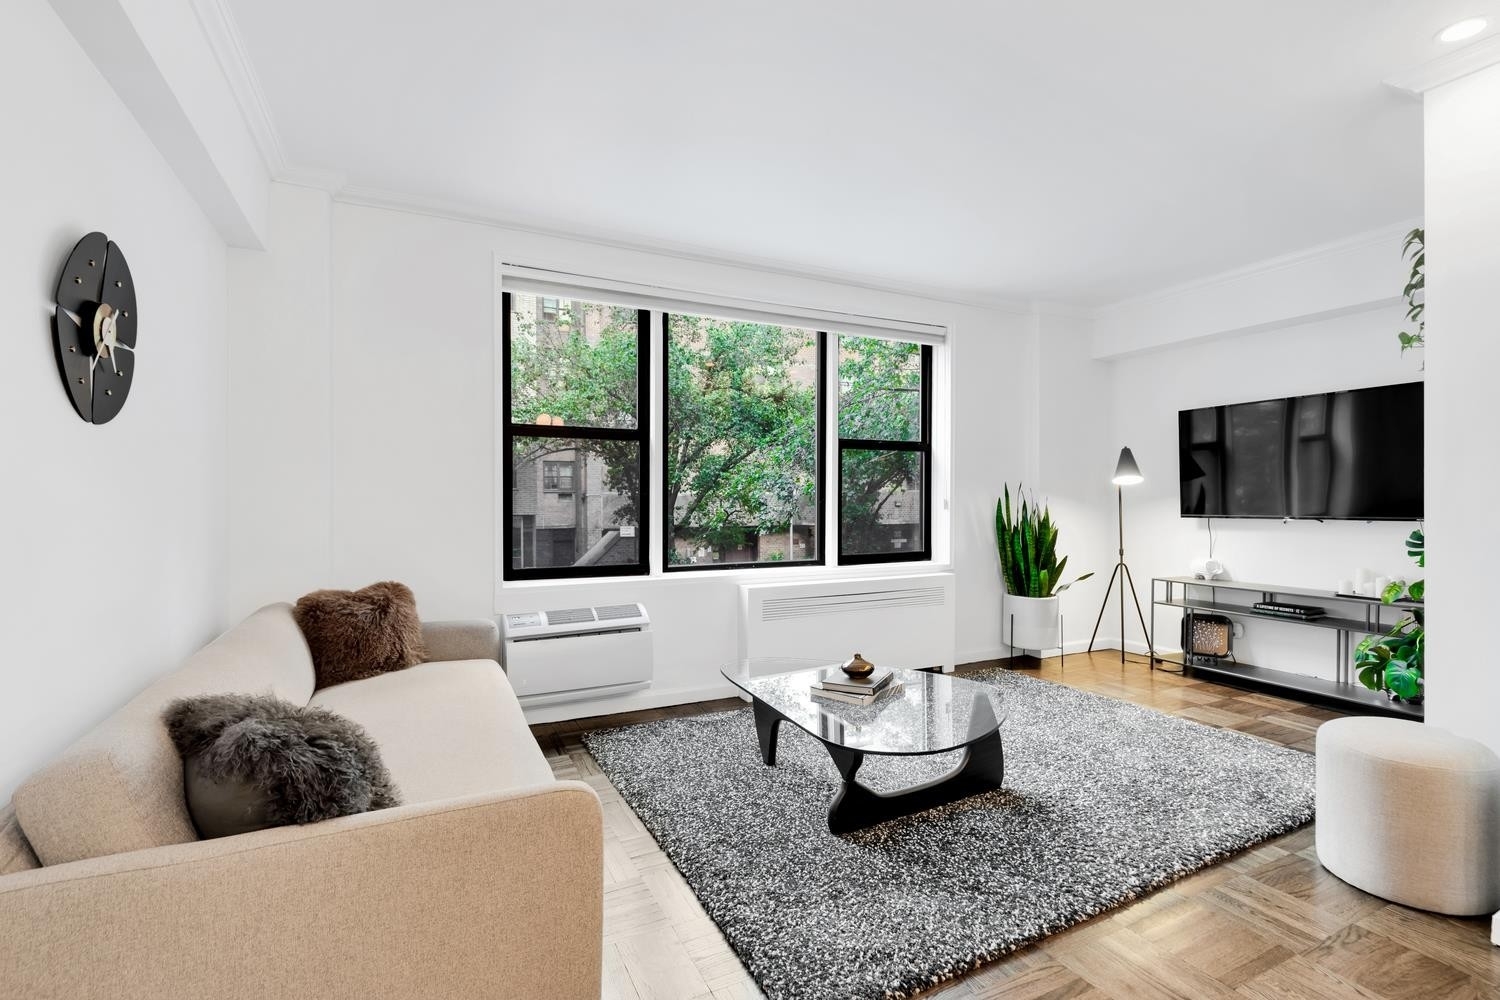 Co-op Properties for Sale at Lawrence House, 330 E 70TH ST , 1J Lenox Hill, New York, New York 10021